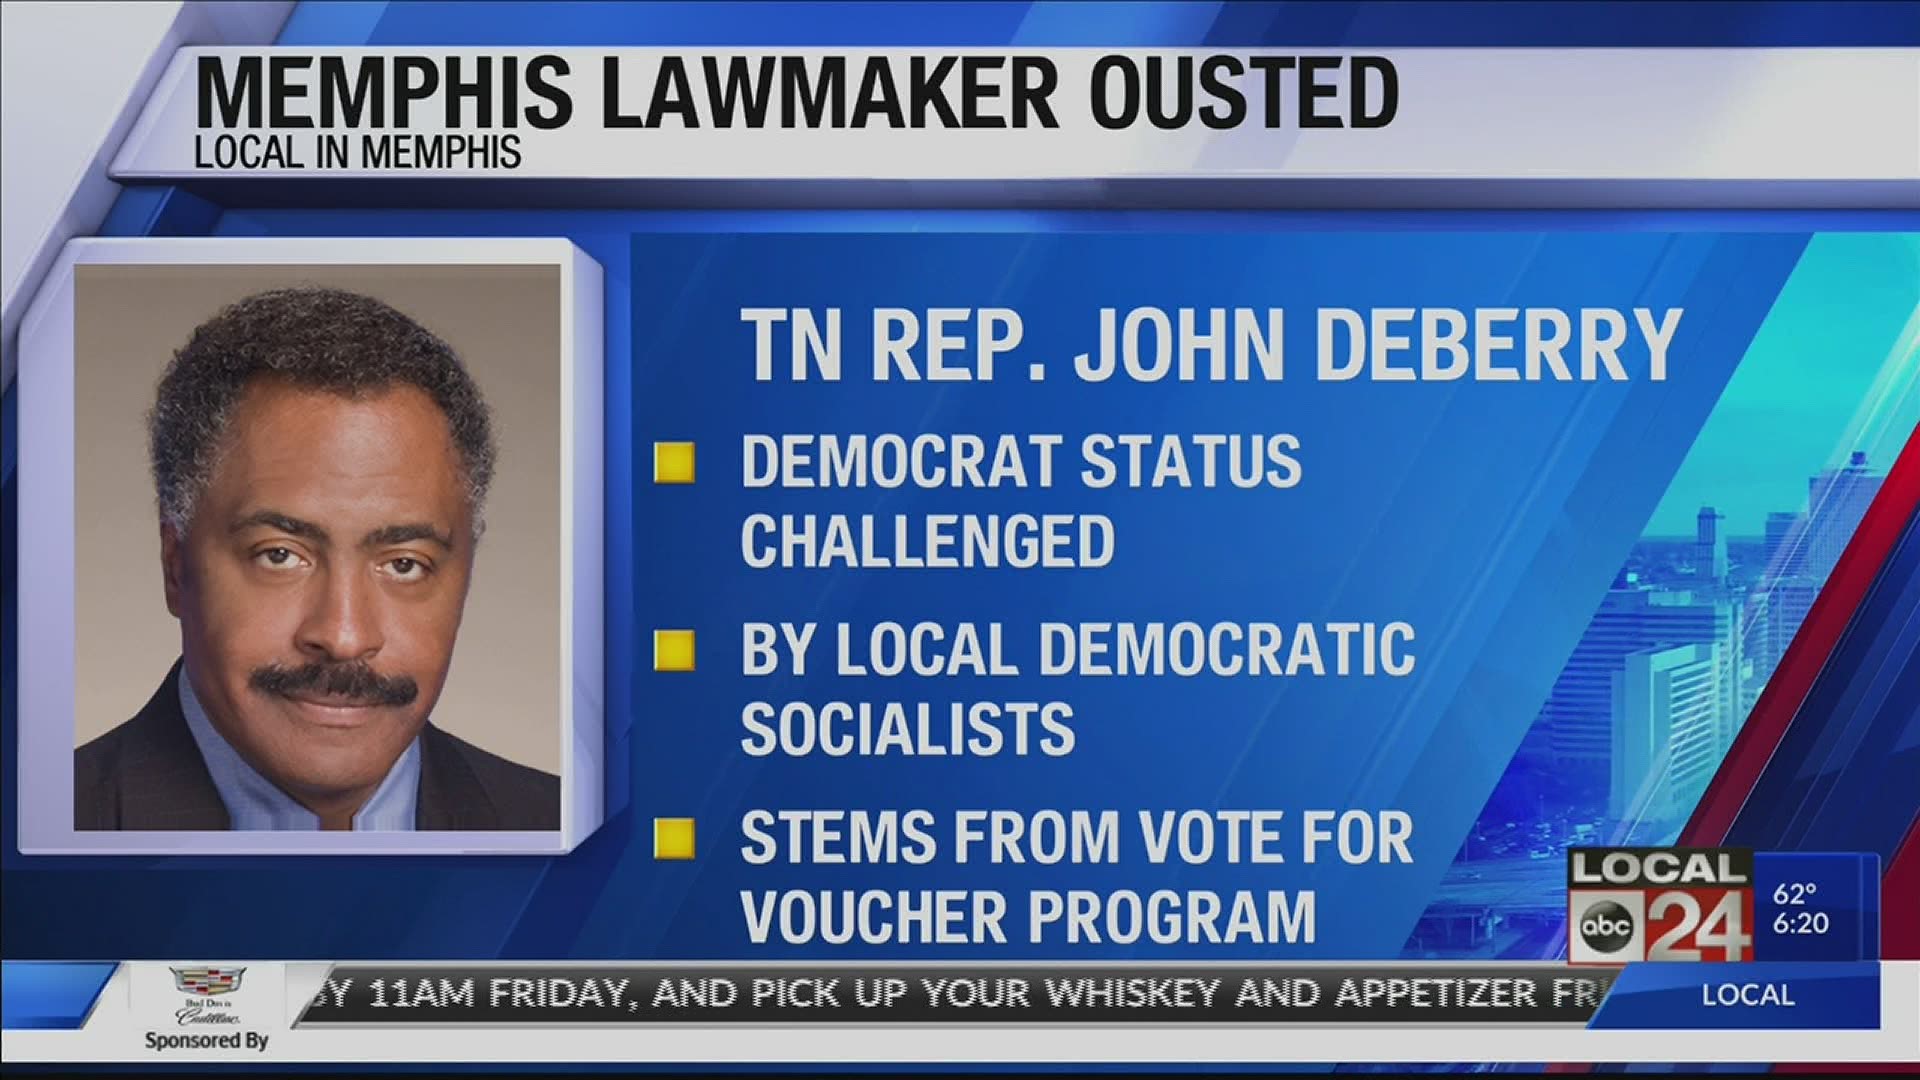 John DeBerry has served as a Memphis Democrat for 26 years.